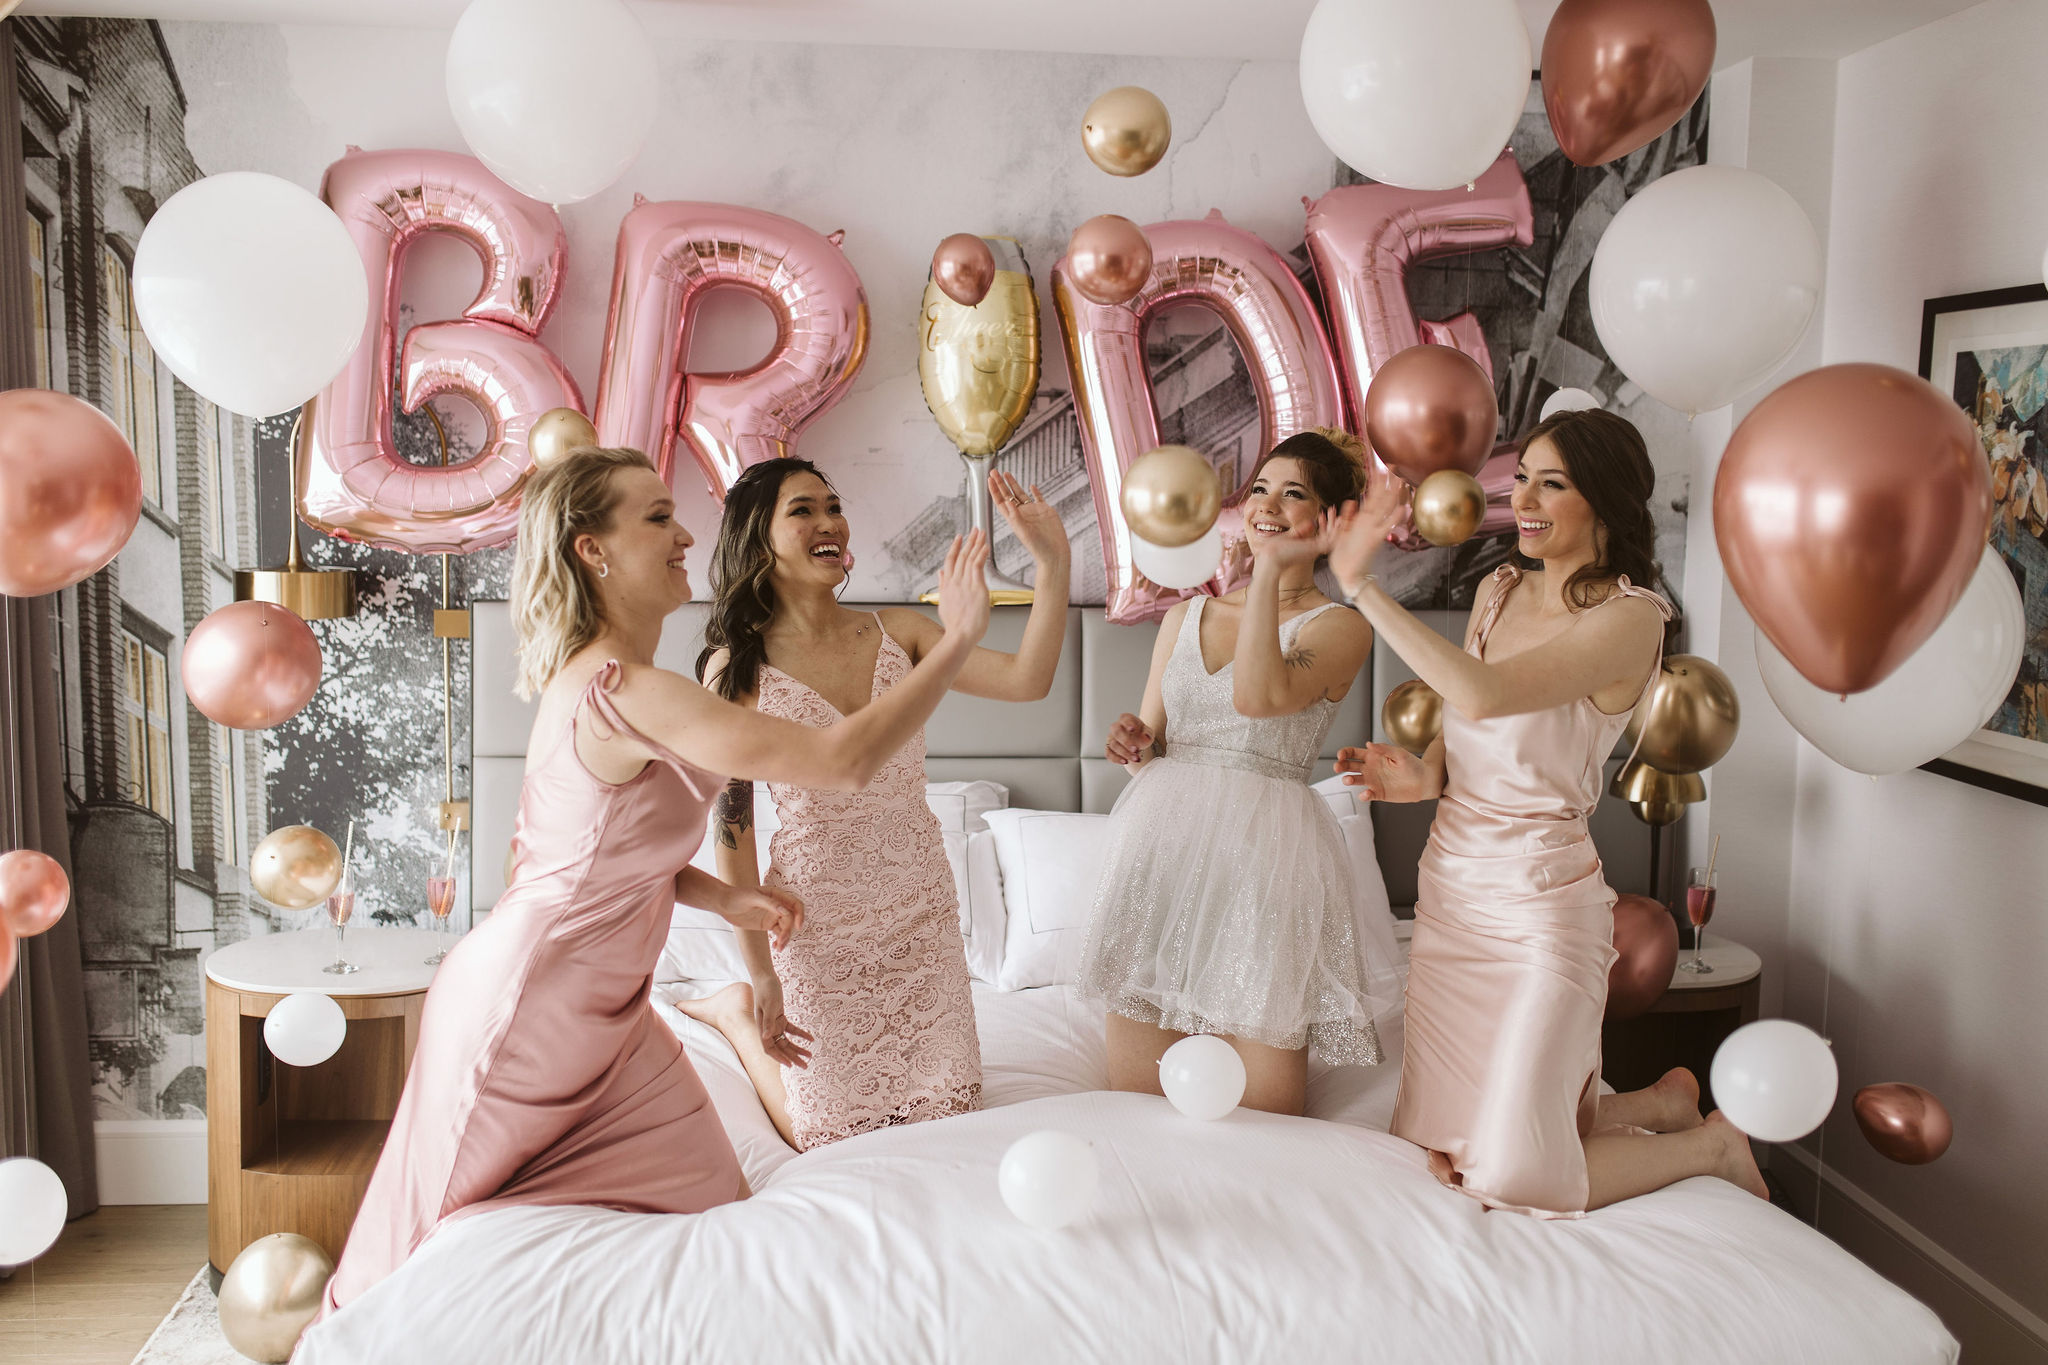 I Do Crew, Bachelorette Party Themes, Supplies & Decorations